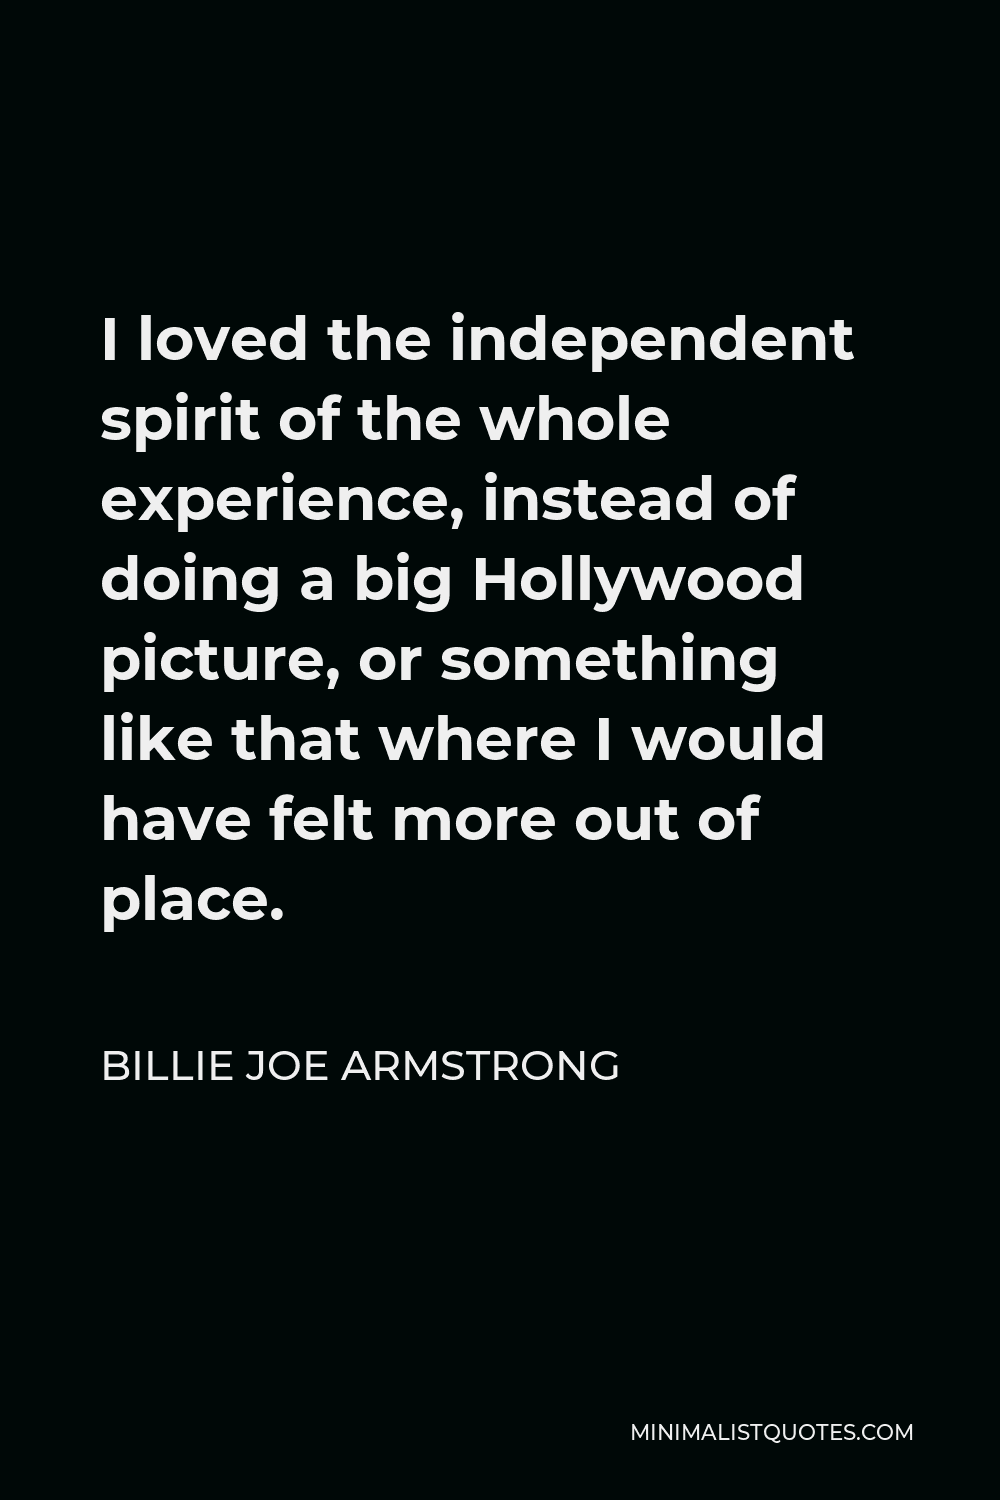 Billie Joe Armstrong Quote - I loved the independent spirit of the whole experience, instead of doing a big Hollywood picture, or something like that where I would have felt more out of place.